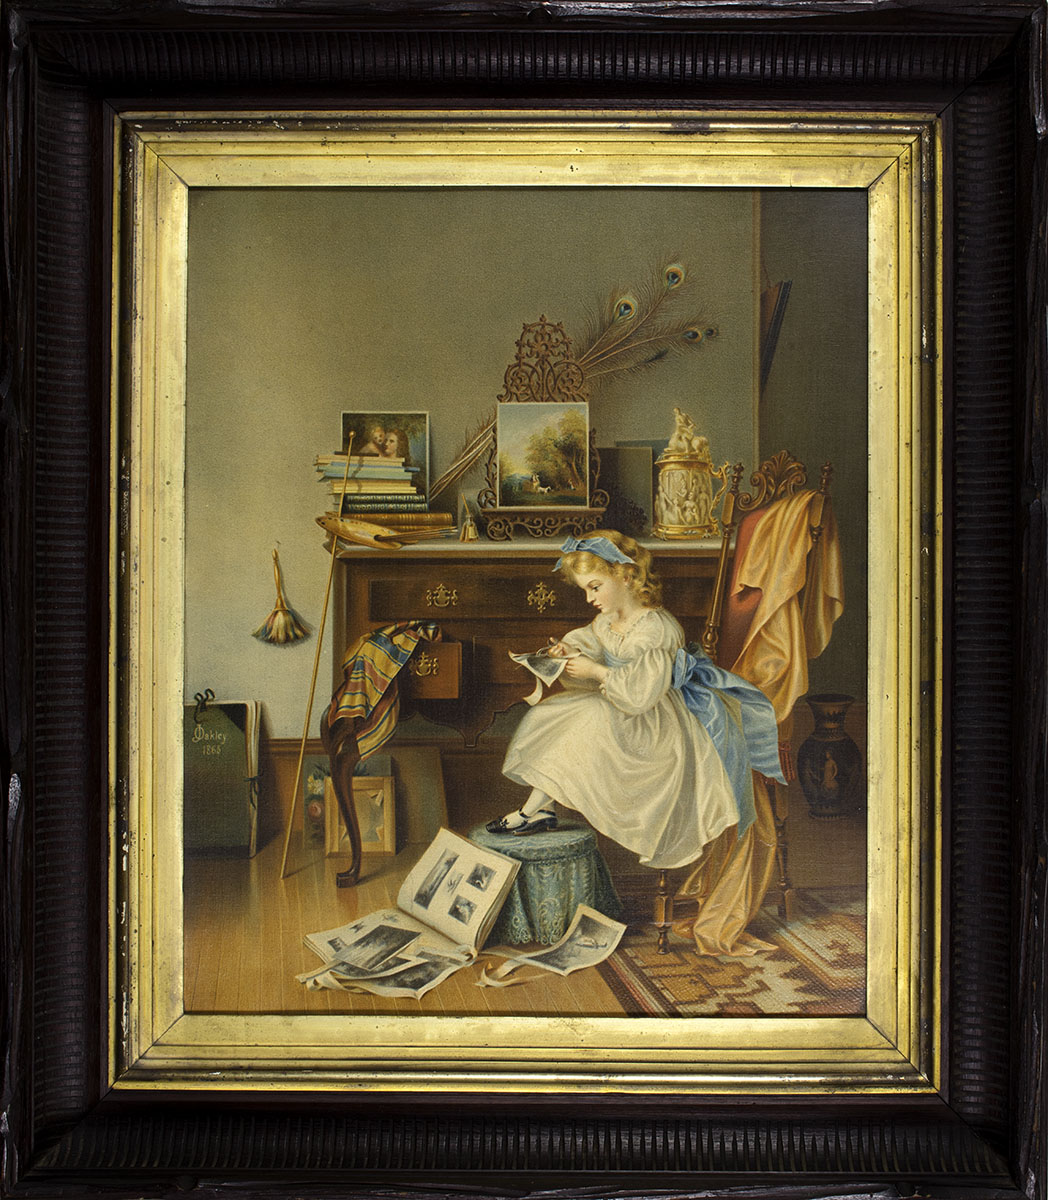 The Little Scrapbook Maker. Chromo-lithograph after an 1865 painting by Juliana Oakley (Chicago,1868). Gift of Ivan Jurin.